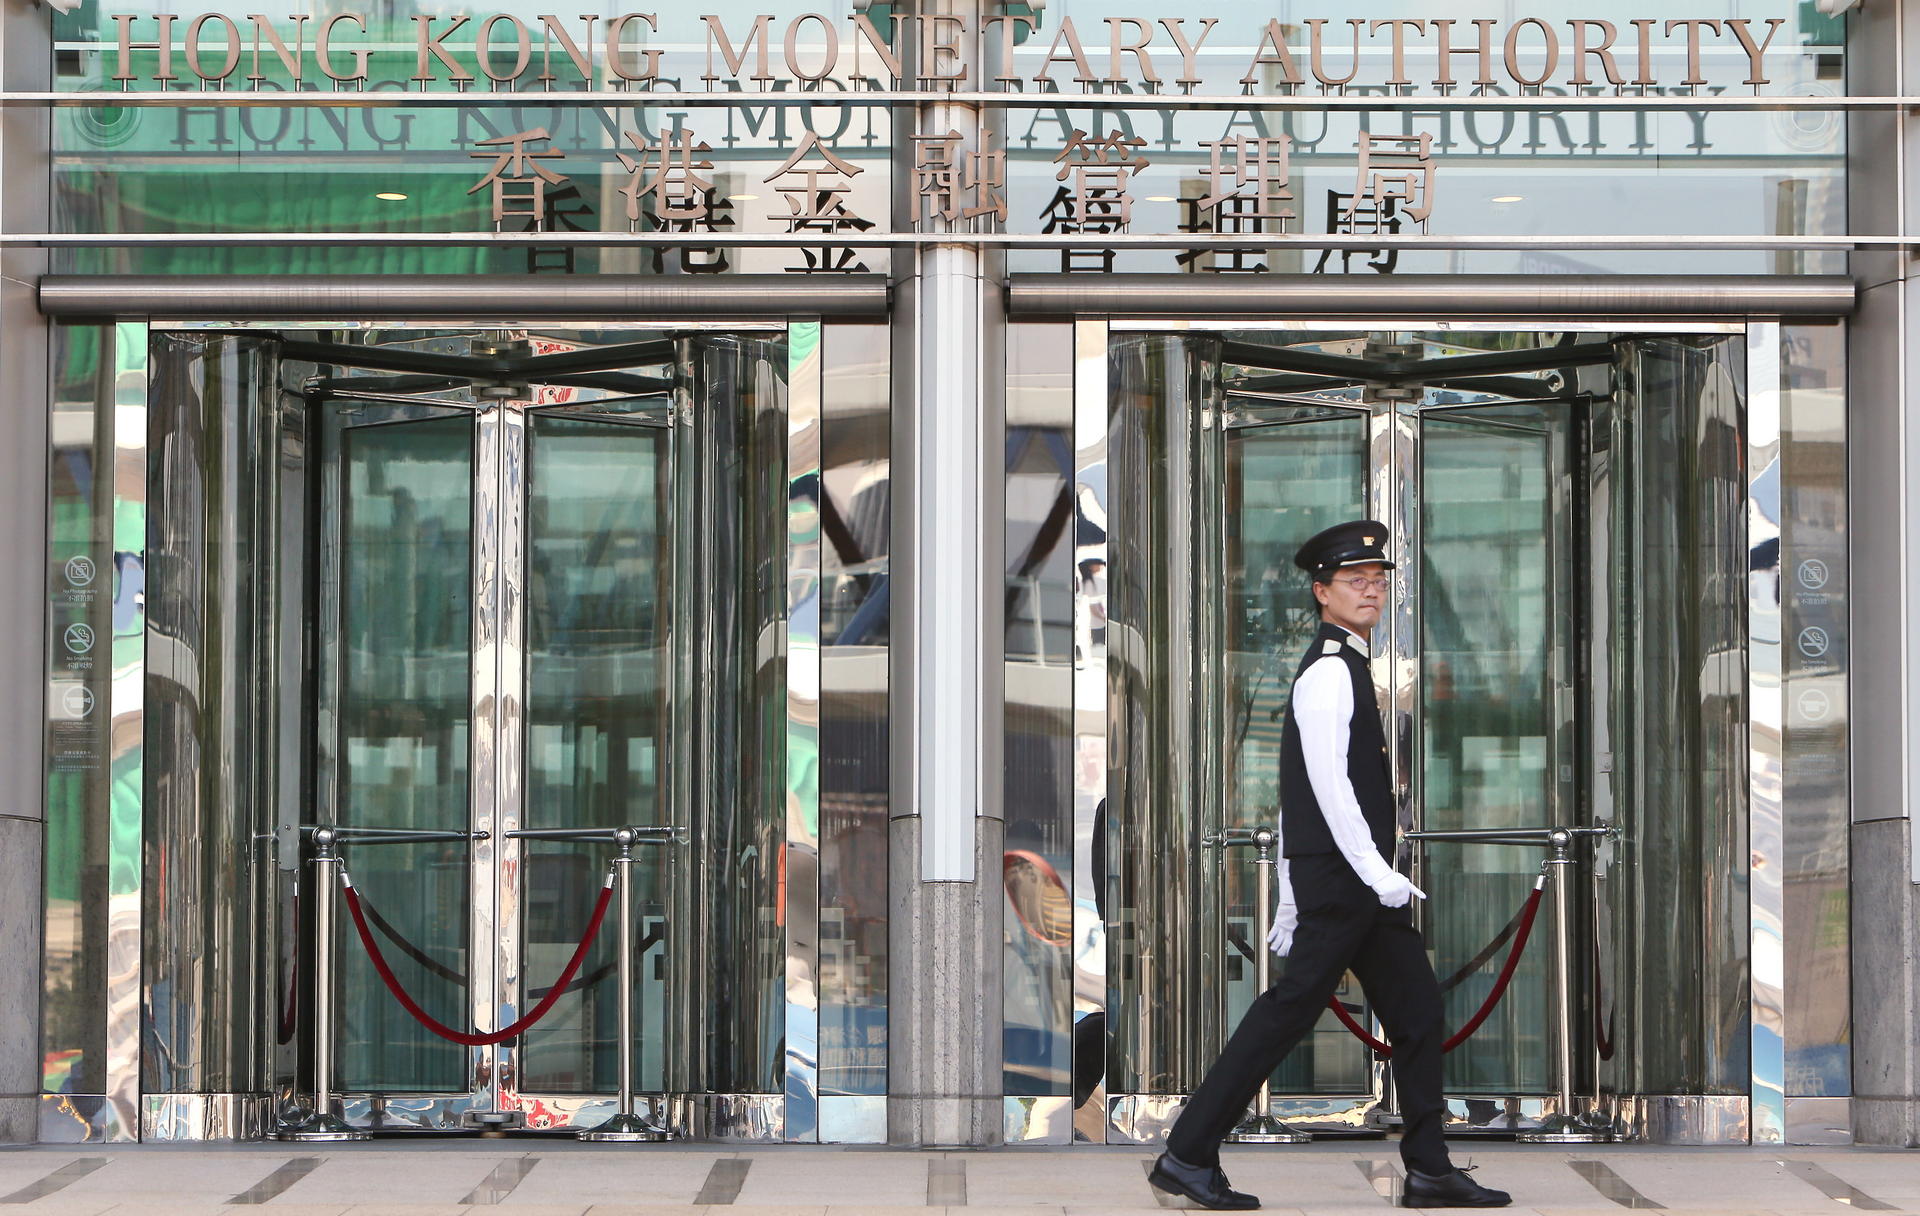 The Hong Kong Monetary Authority says the primary liquidity providers will help boost the city as an offshore yuan hub. Photo: Sam Tsang